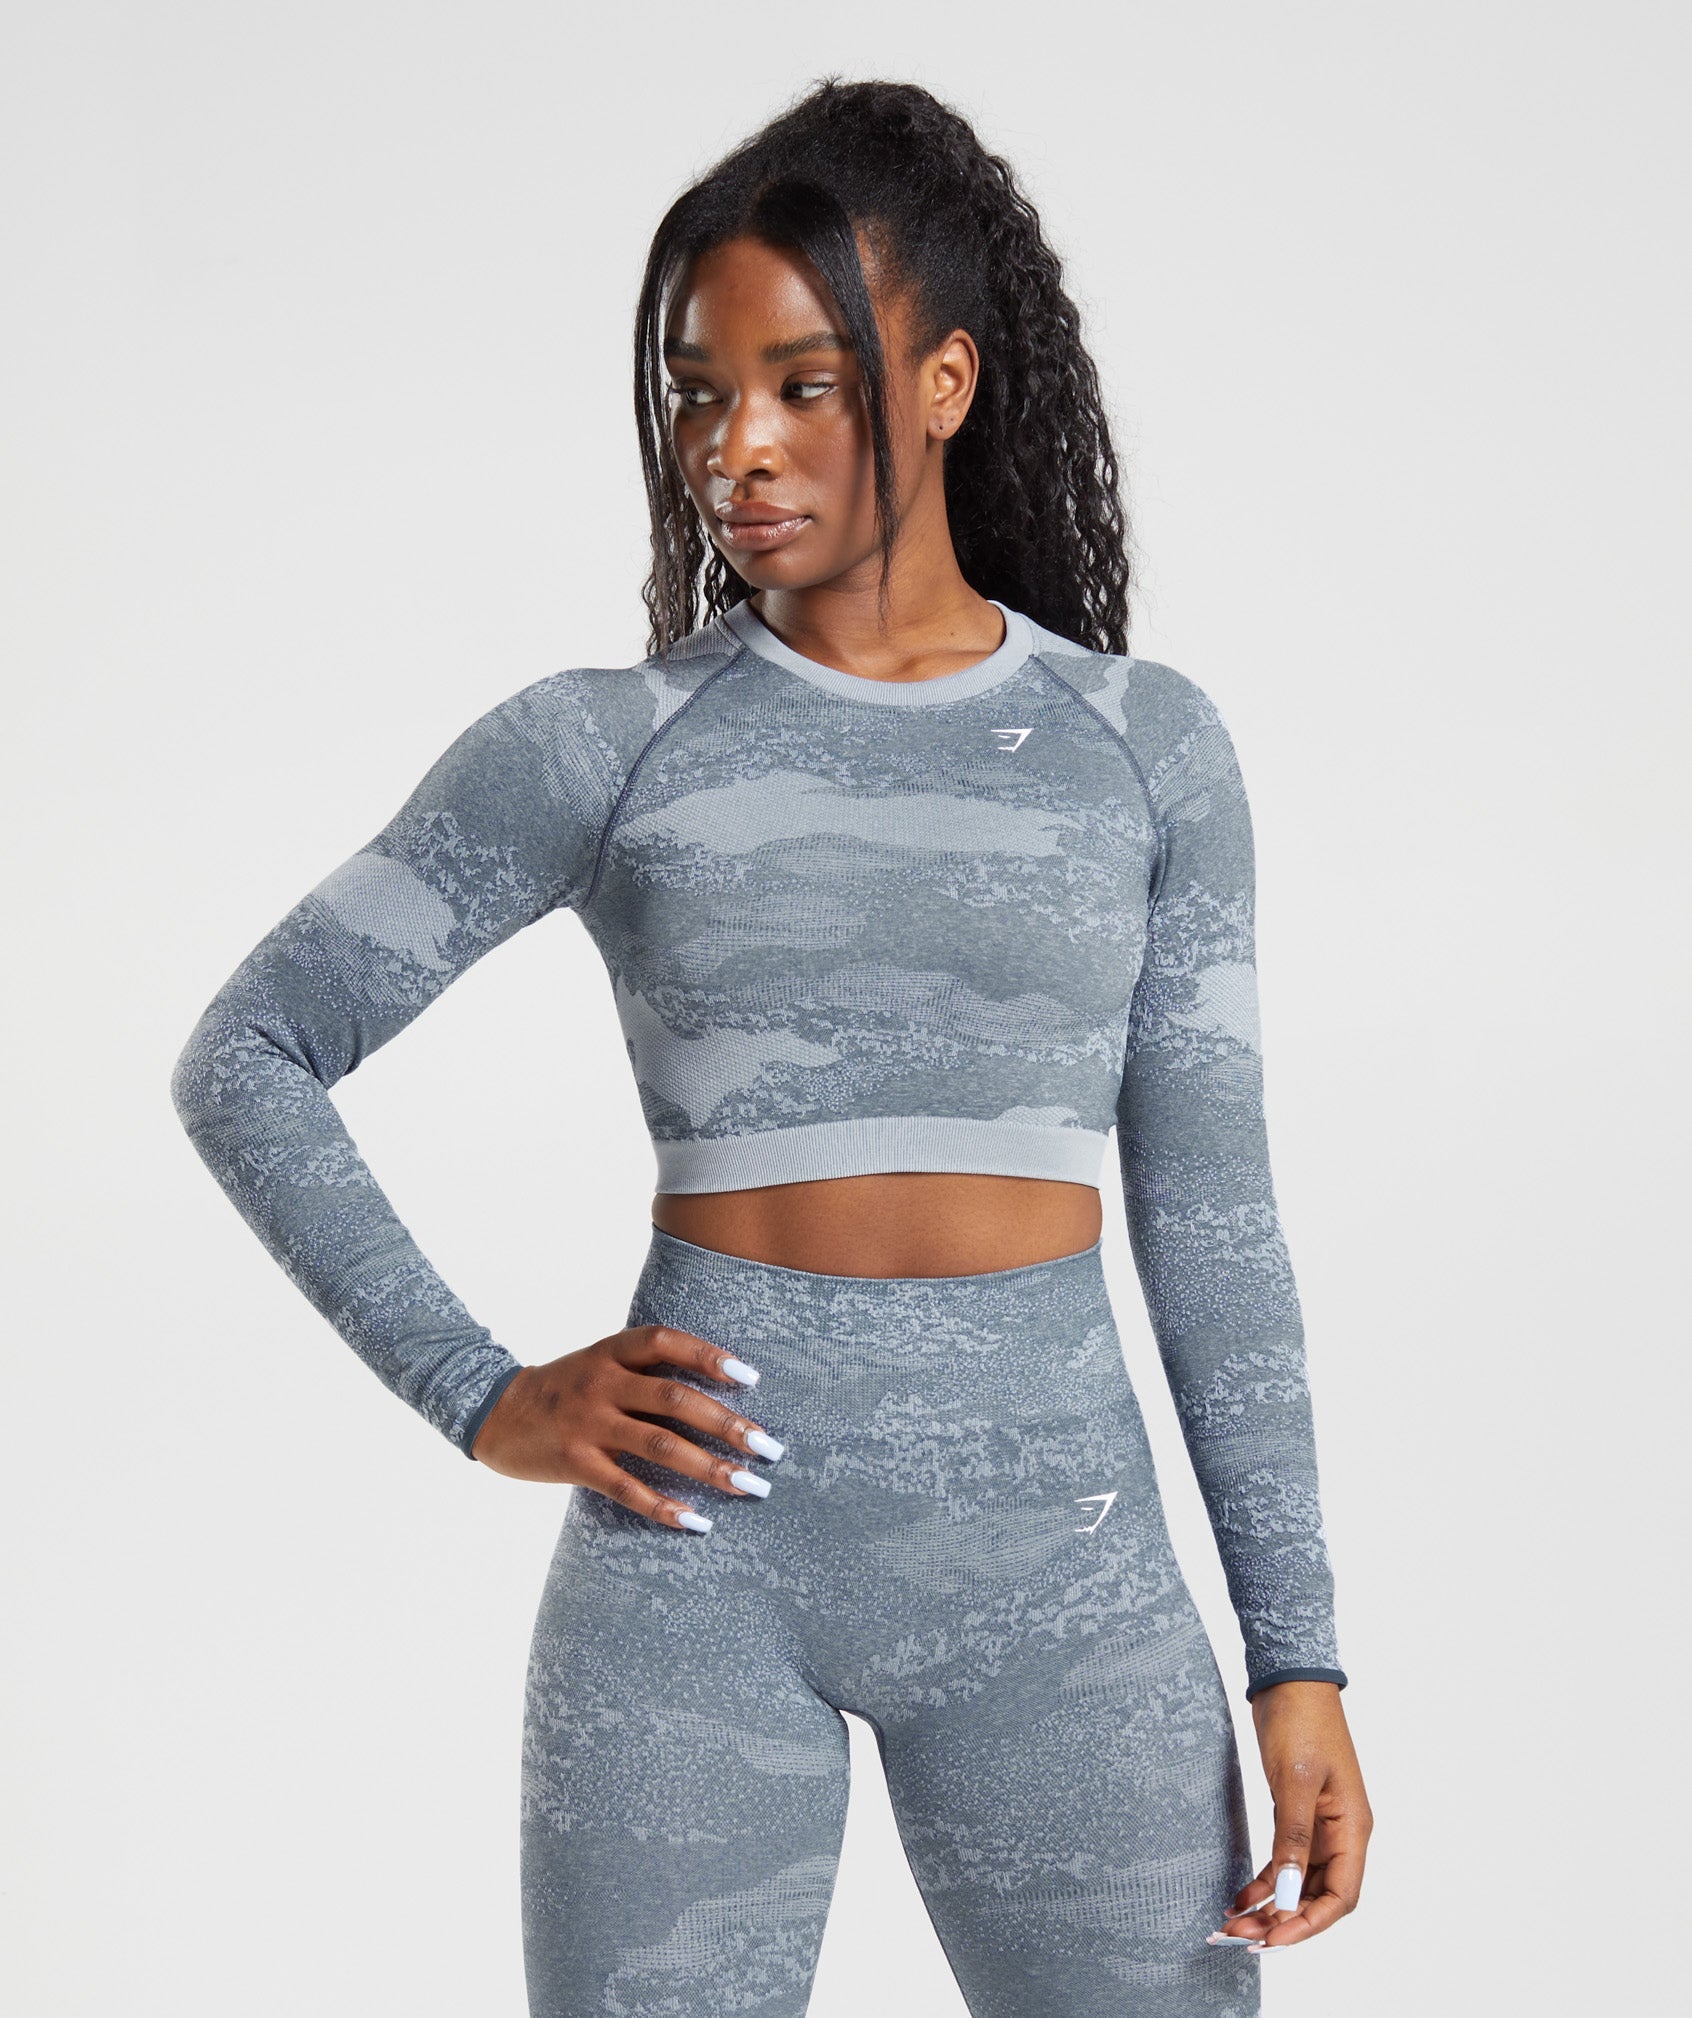 Gymshark Adapt Camo Seamless Lace Up Back Top - Pebble Grey/Soul Brown